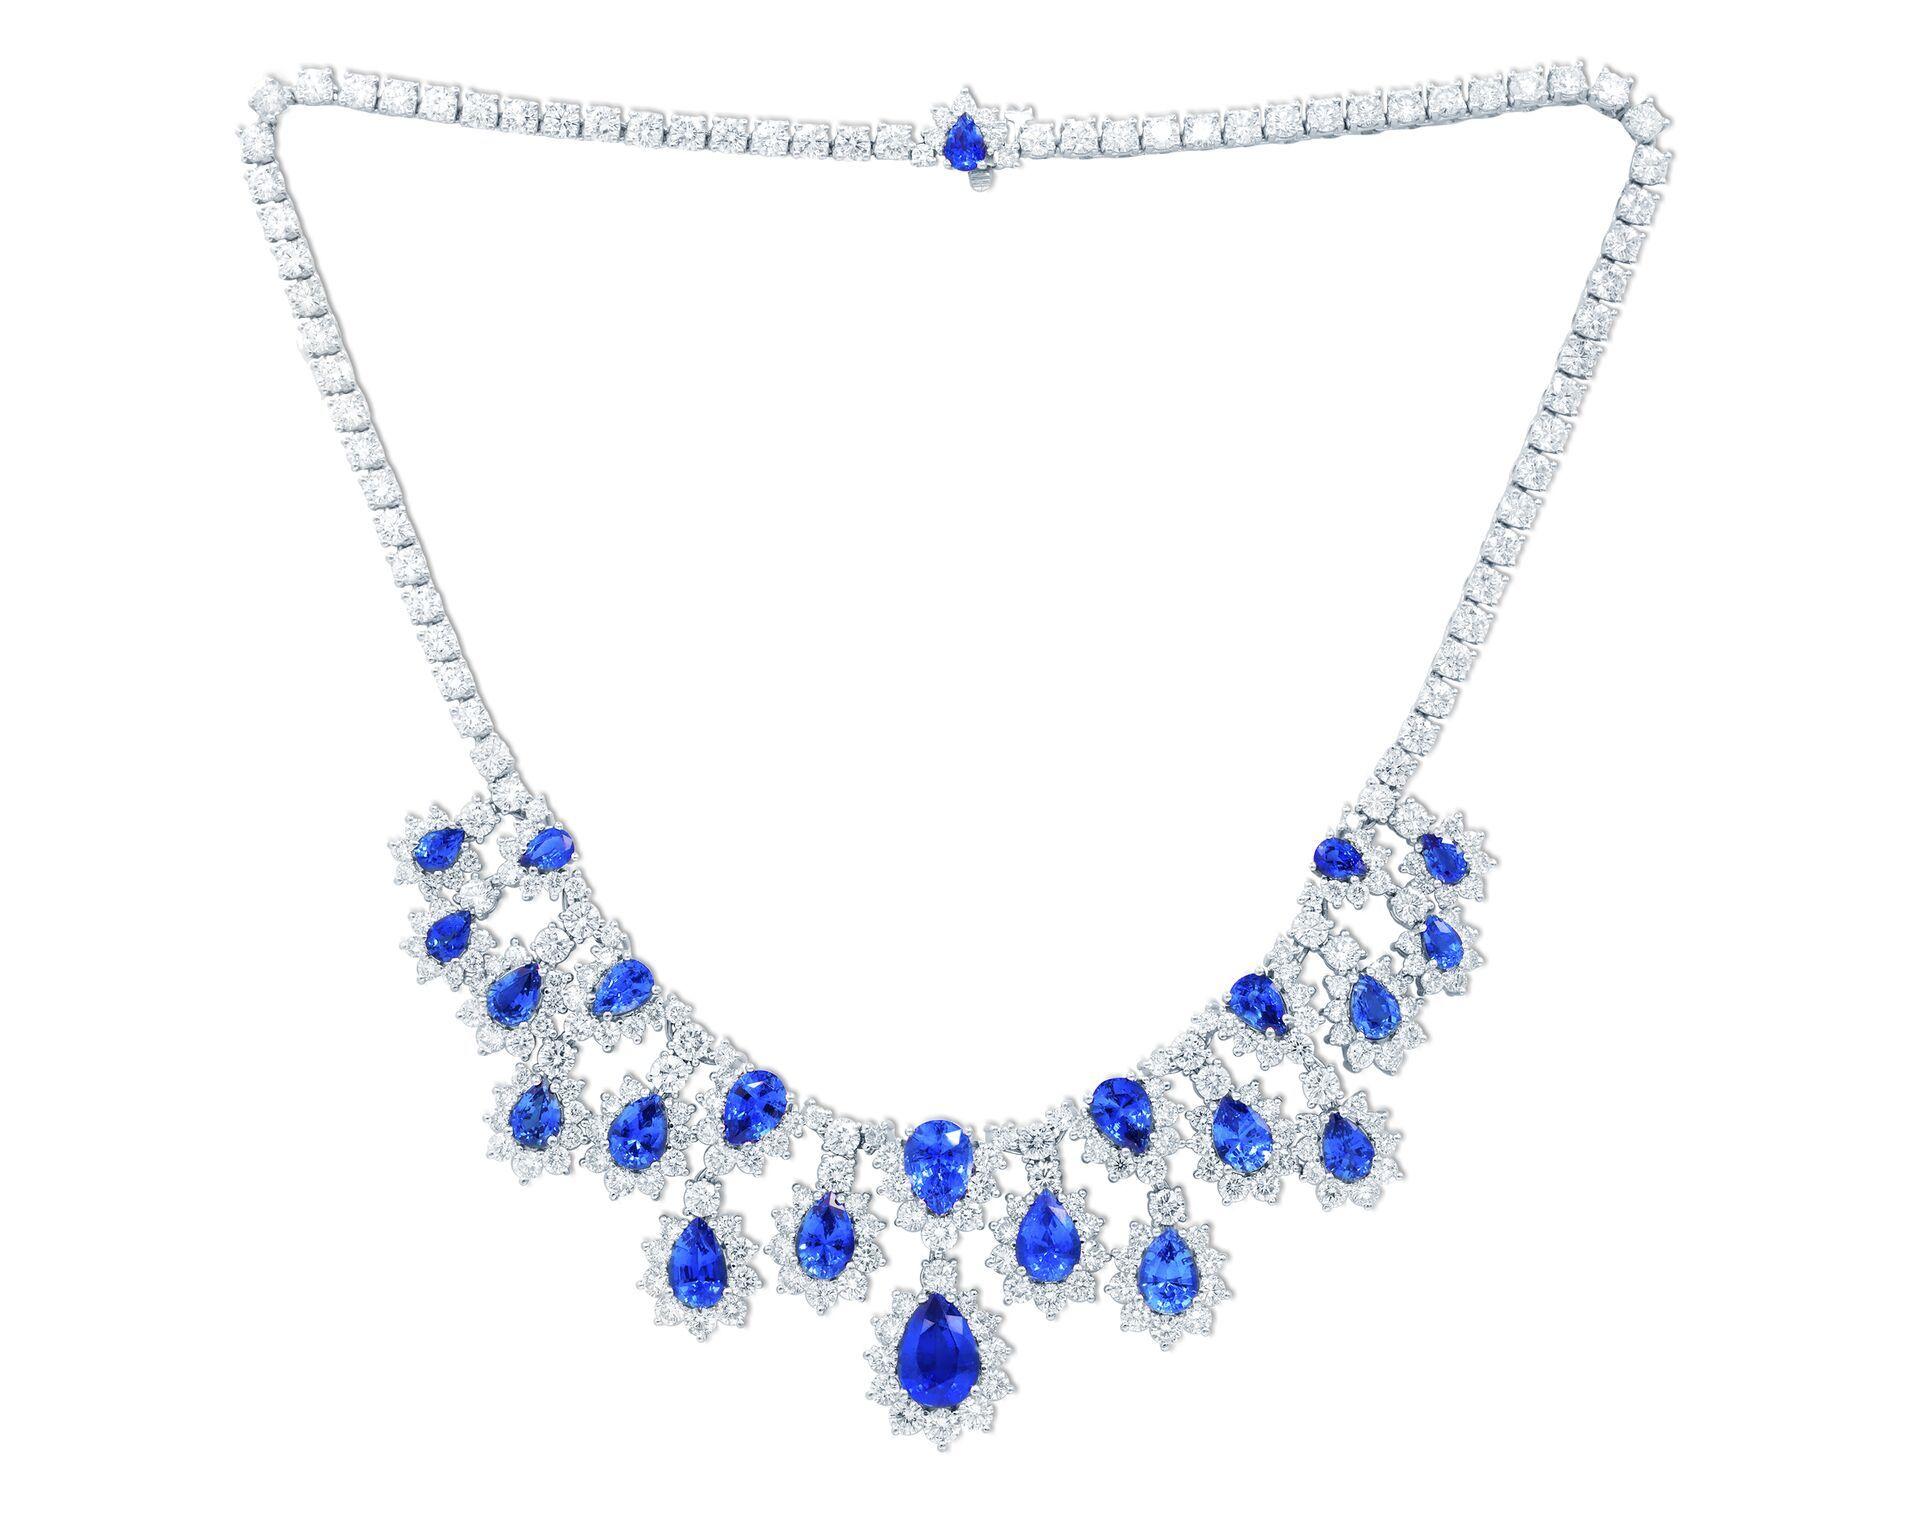 Diana M. 27.36 Carat Pear Cut Sapphire and Diamond Necklace In New Condition For Sale In New York, NY